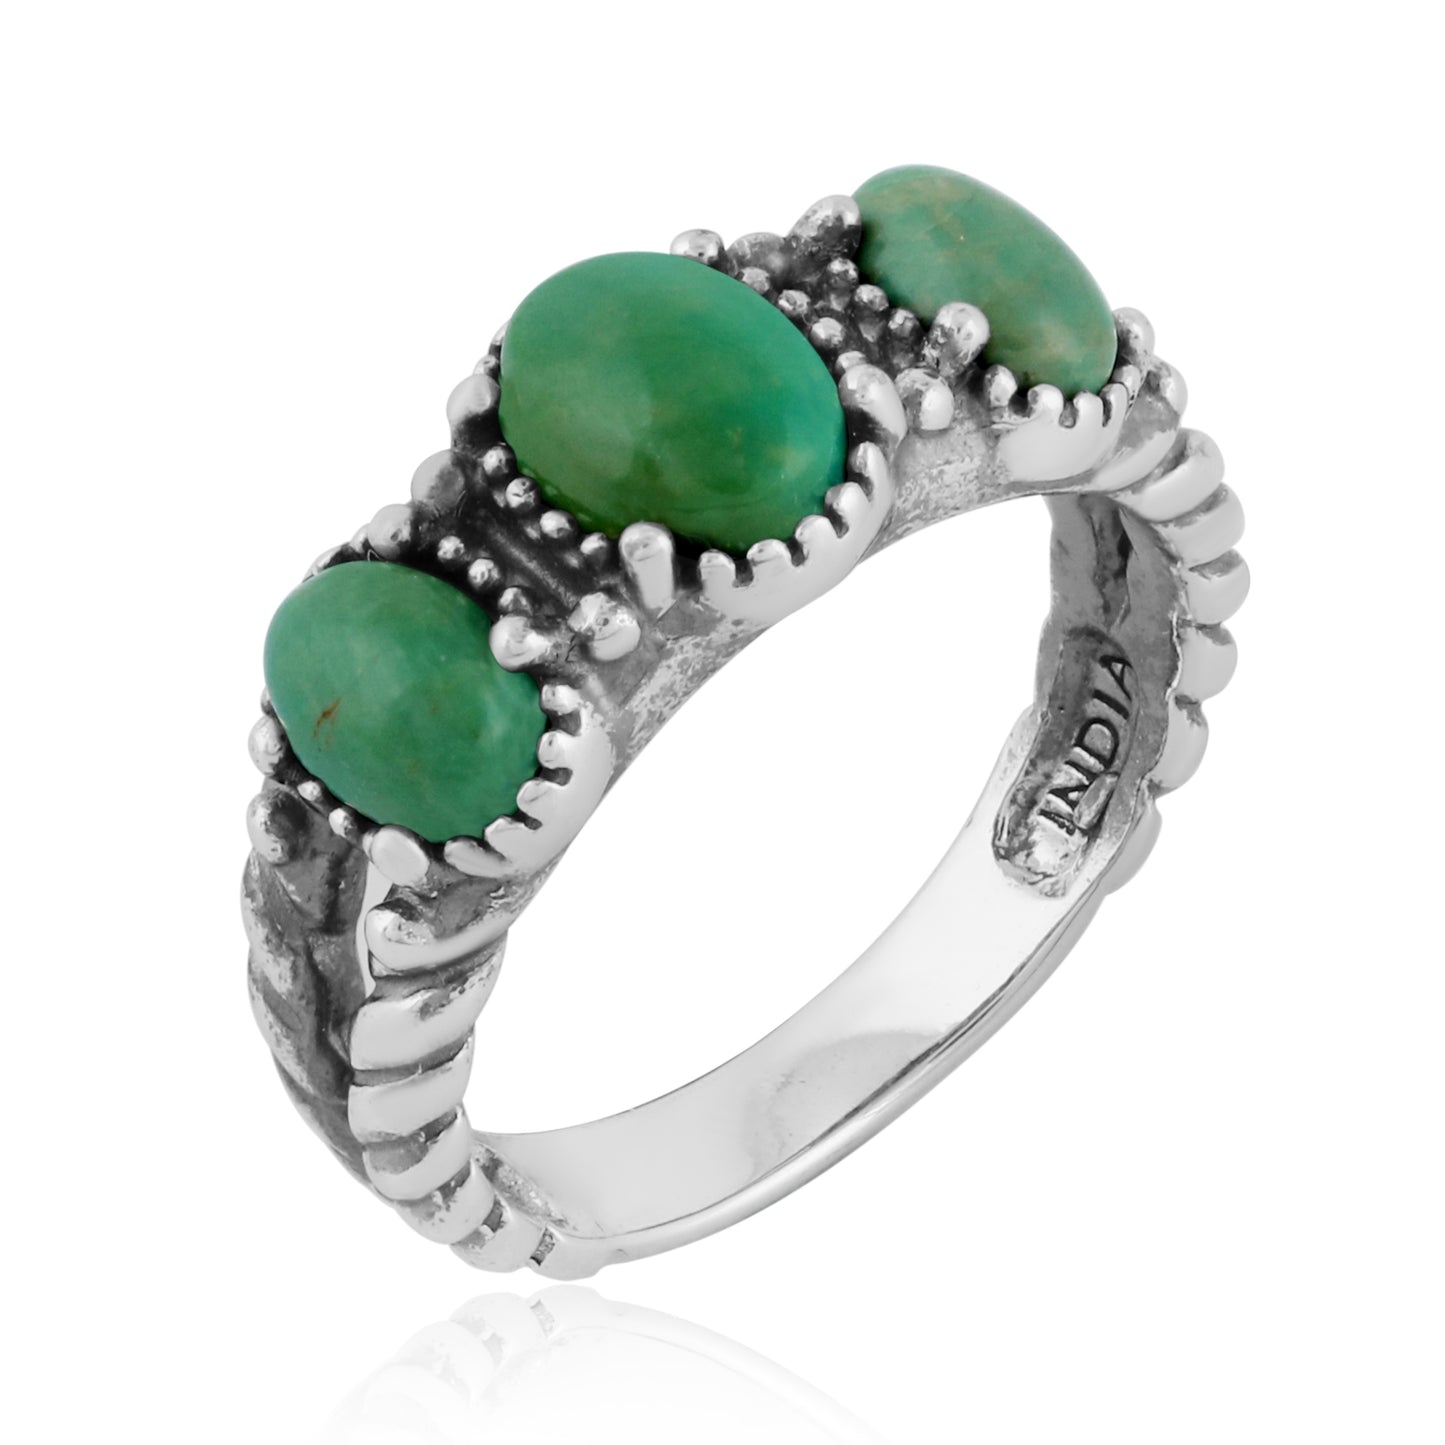 American West Sterling Silver Women's Ring Green Turquoise Gemstone 3-Stone Design Size 5-10